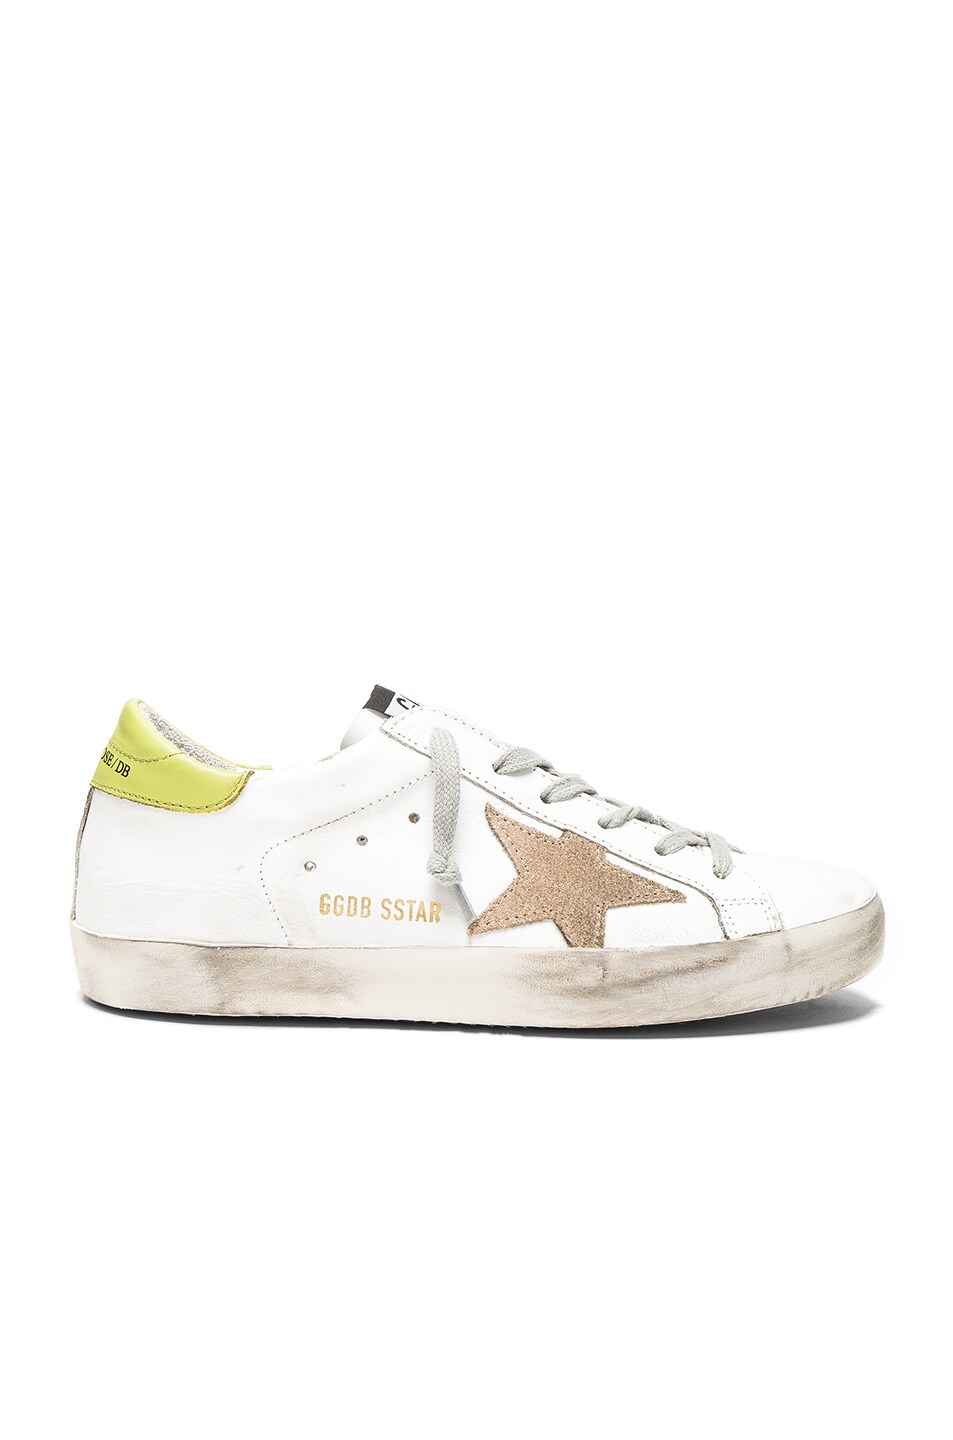 Image 1 of Golden Goose Leather Superstar Low Sneakers in White & Wasabi